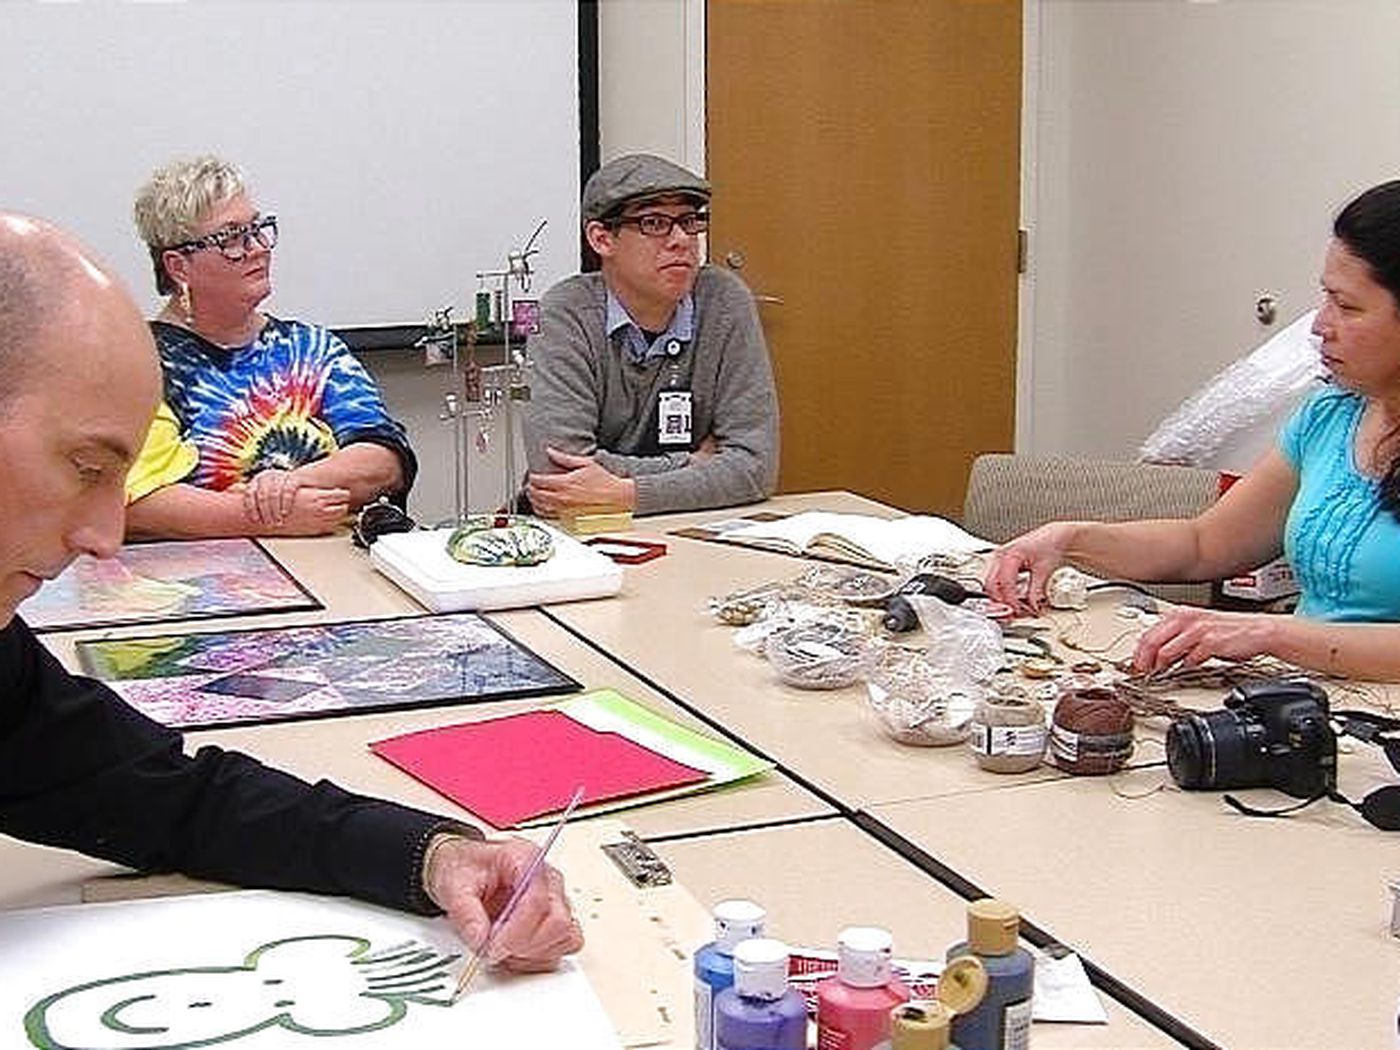 Art program gives patients opportunity to focus